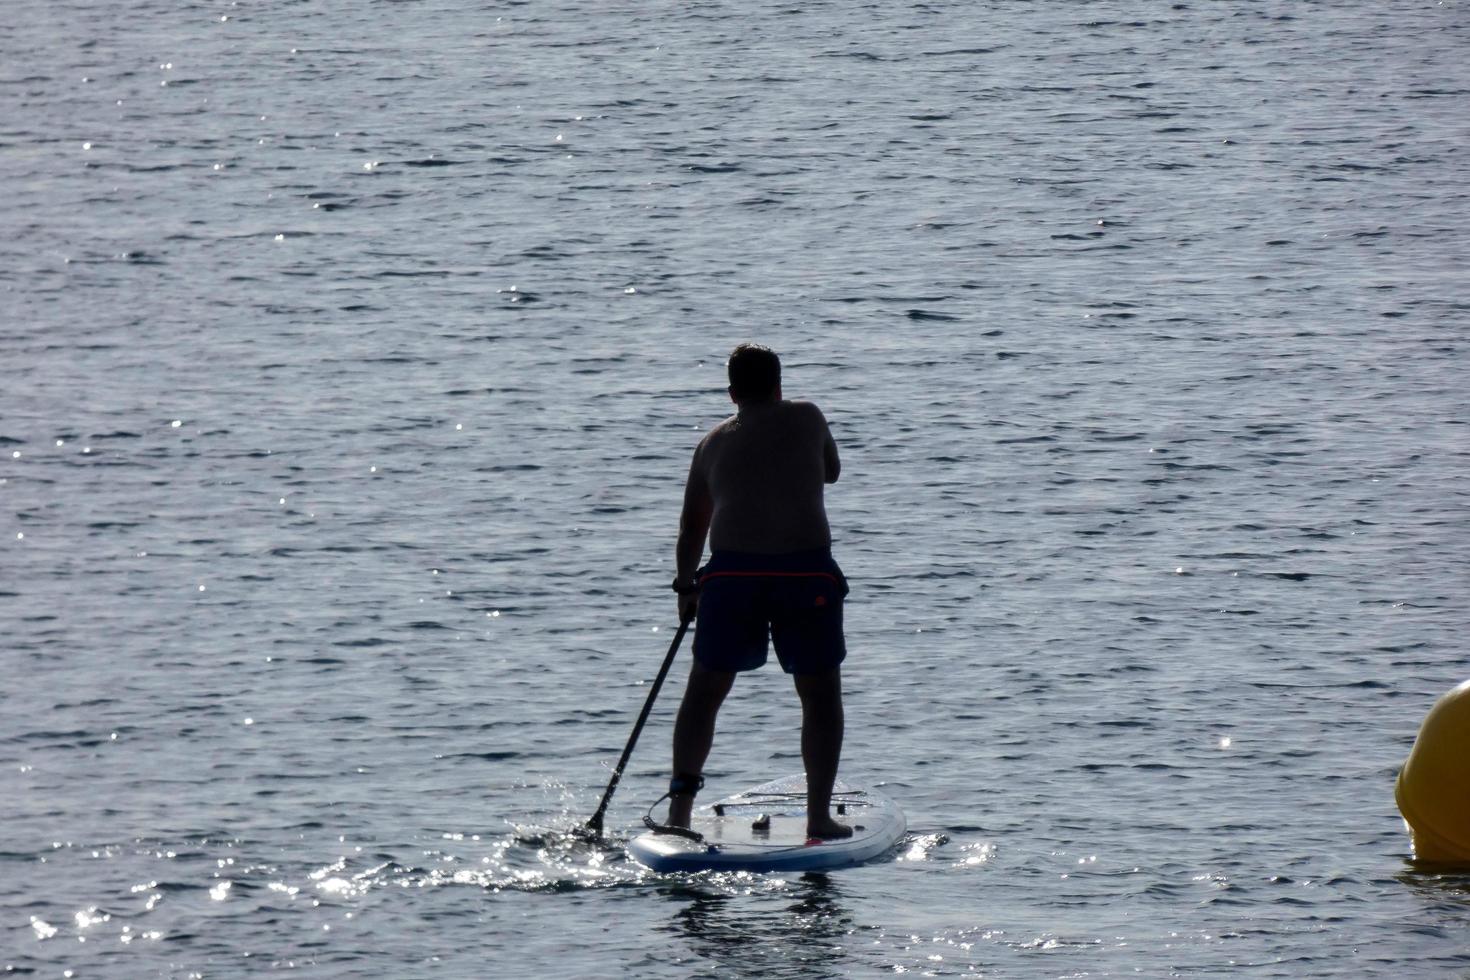 swimmer on vacation paddle surfing in the mediterranean sea photo